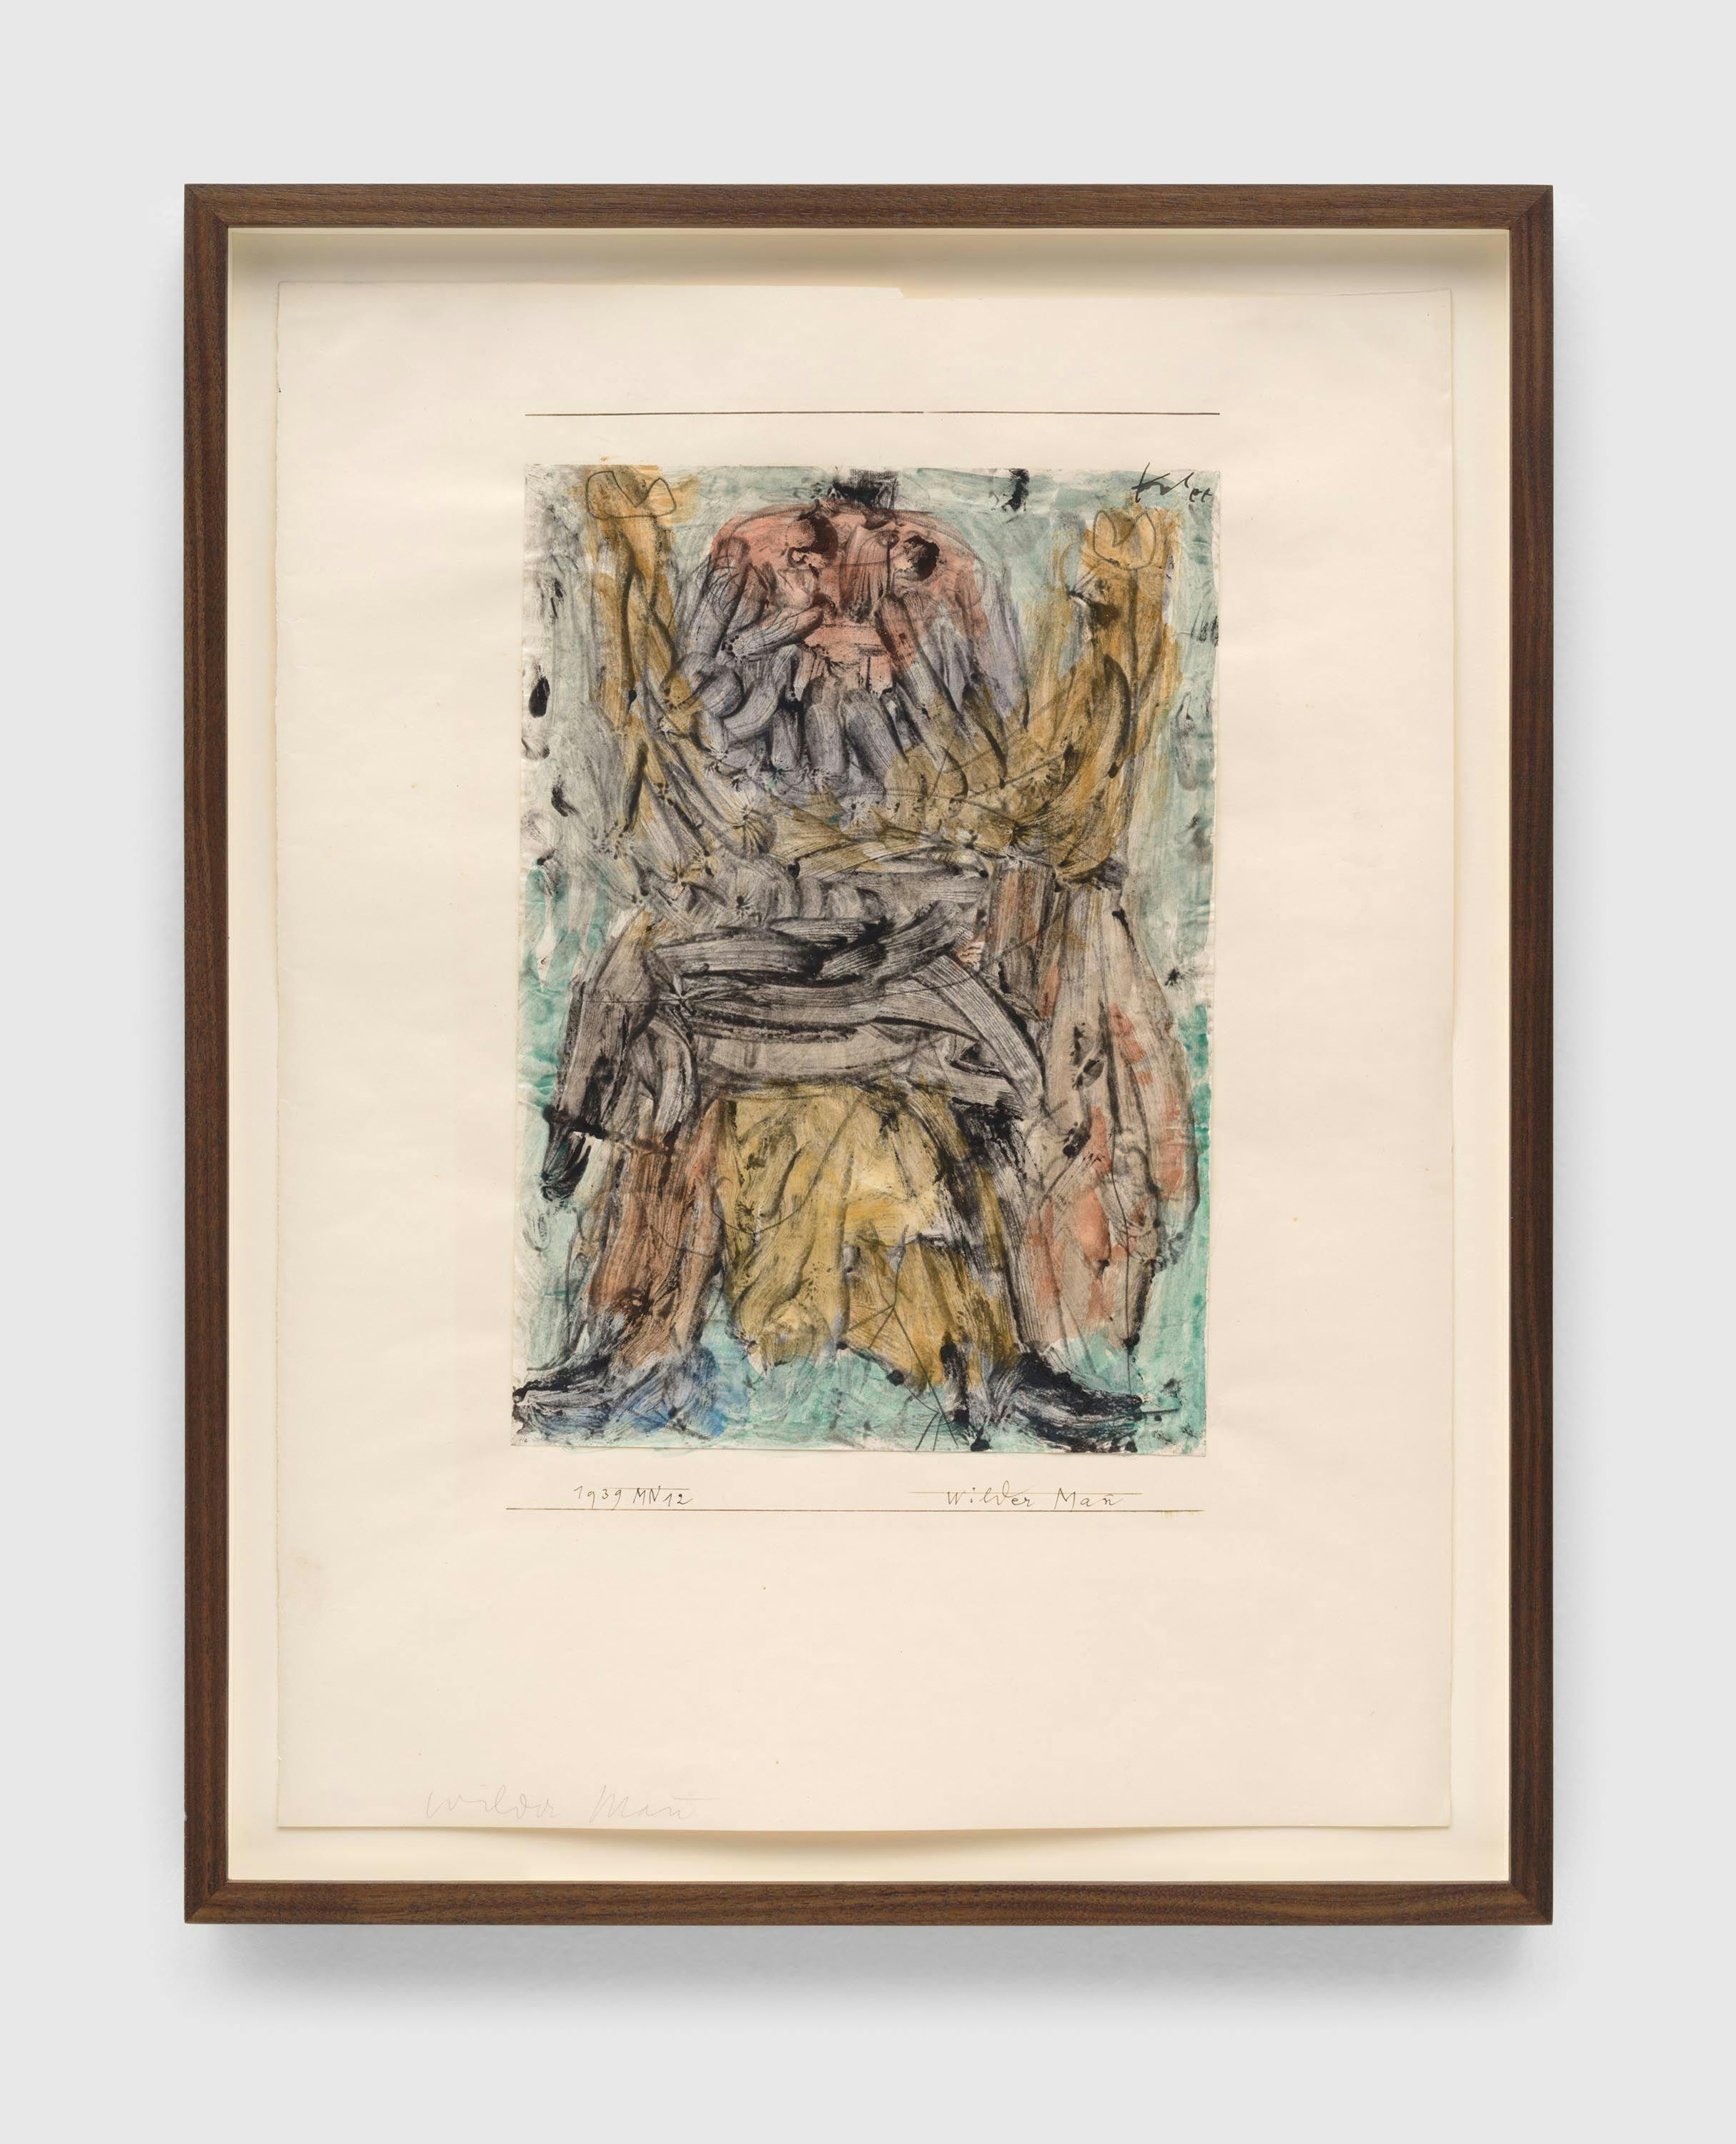 A work on paper by Paul Klee, titled wilder Mann (Wild man), dated 1939.